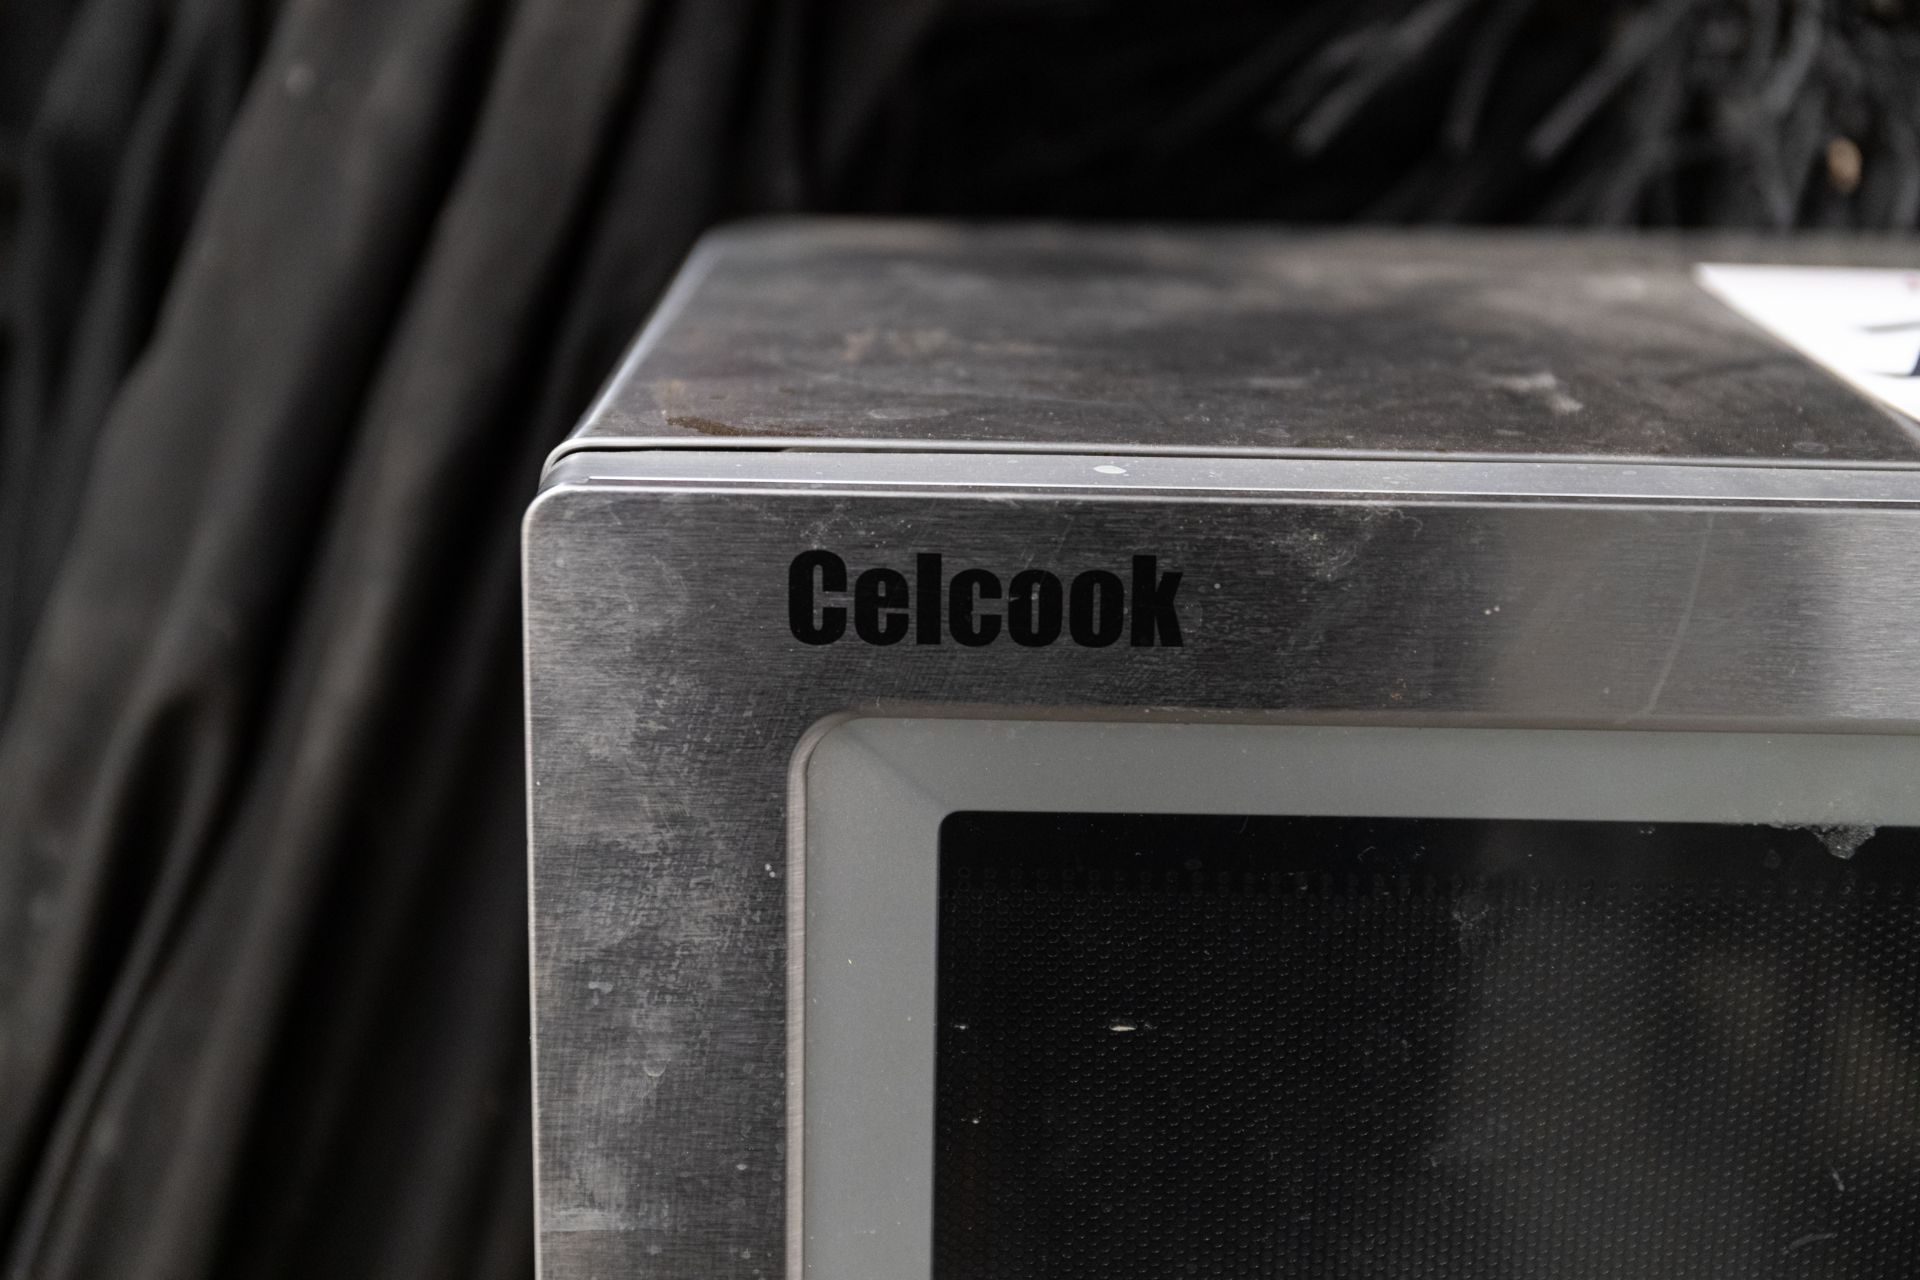 CELCOOK COMMERCIAL MICROWAVE OVEN H-12" D-17" W-20" - Image 3 of 4